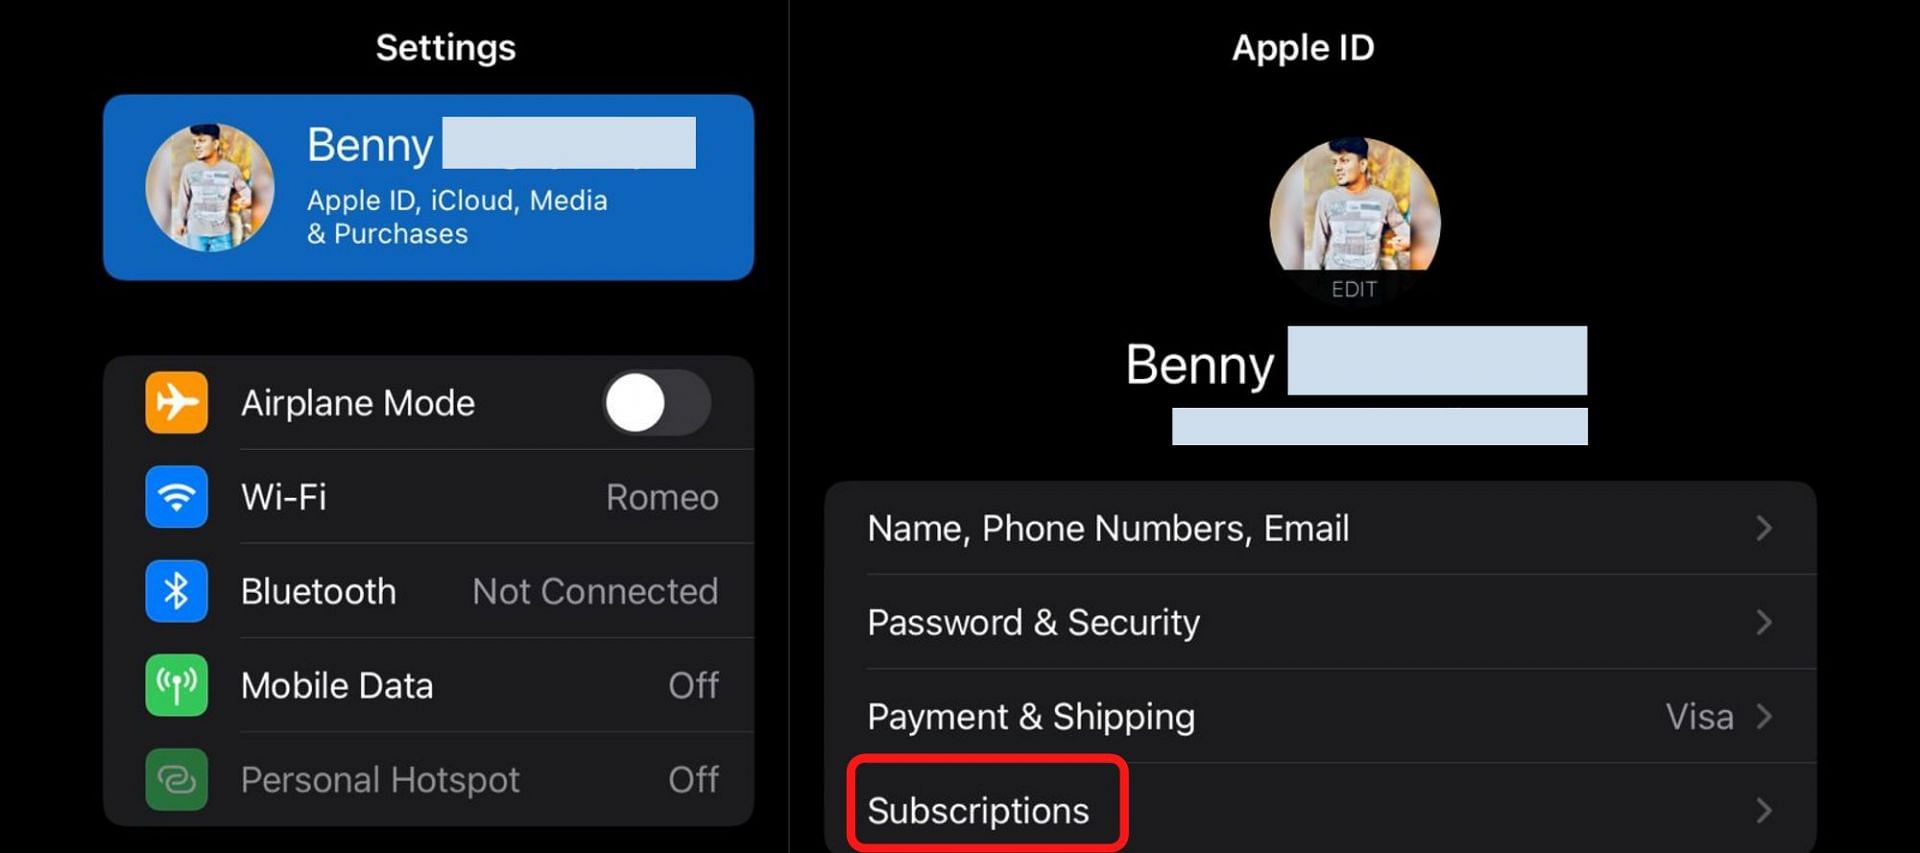 Subscriptions in iPhone (Image via iPhone Screenshot)